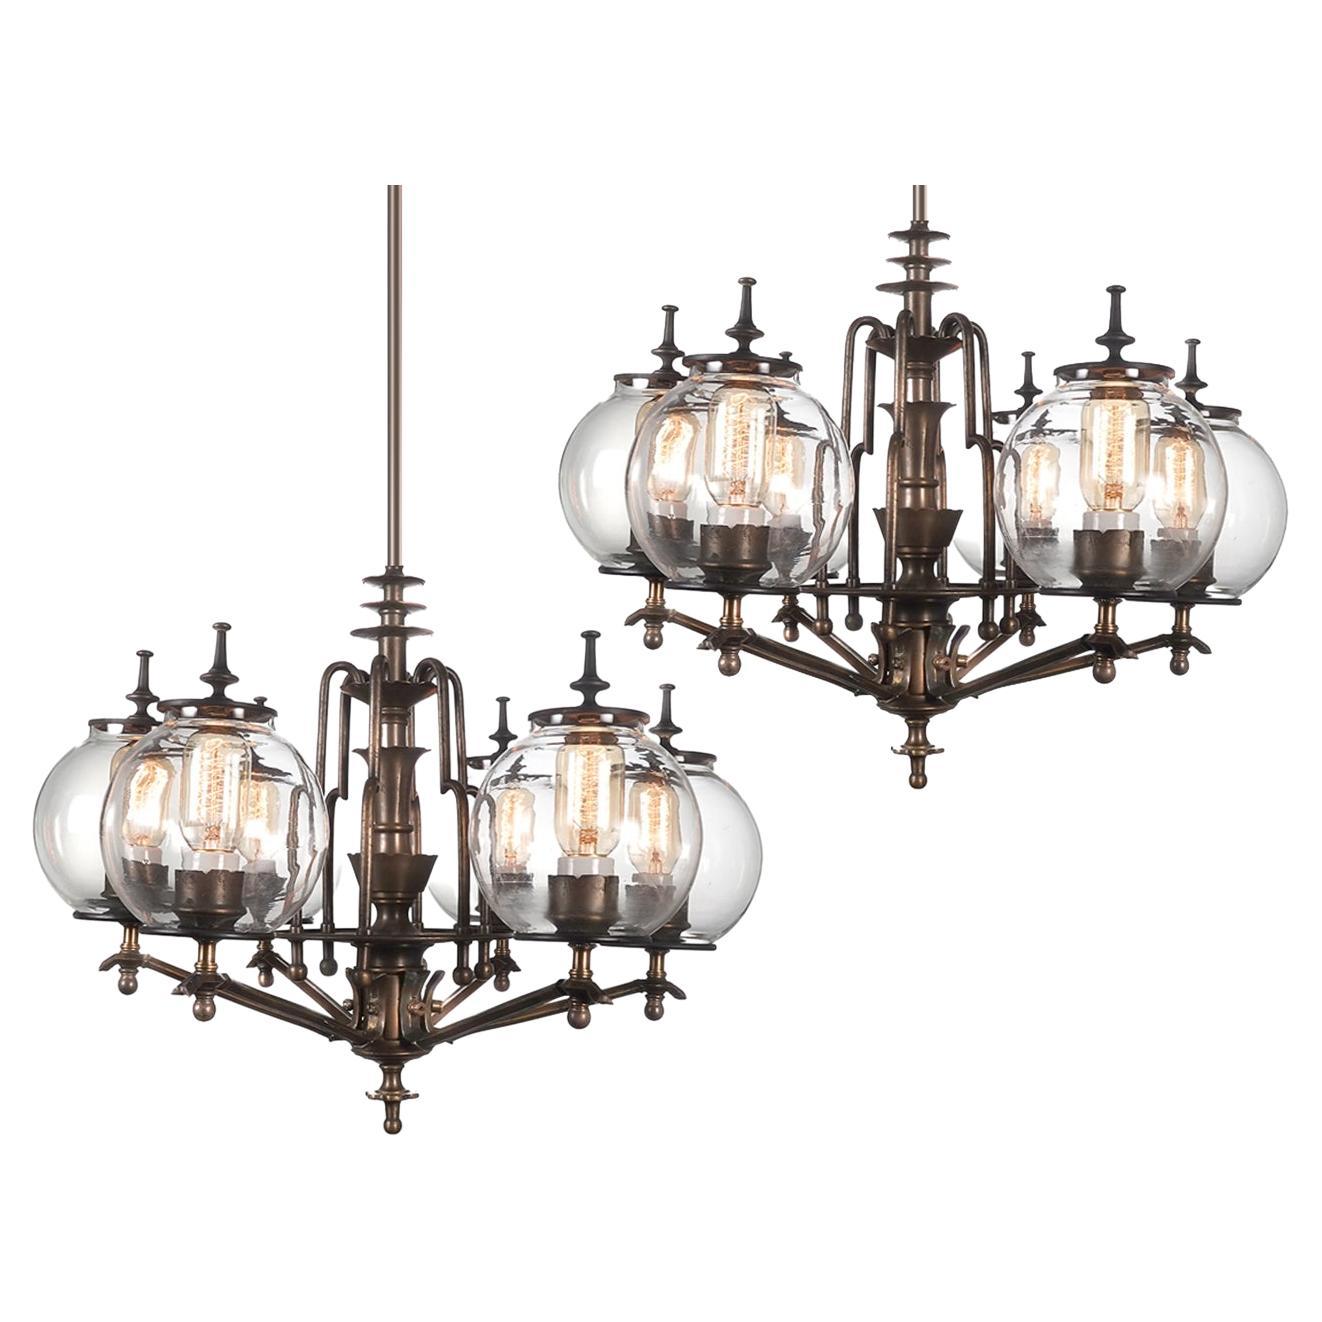 Metropolis Style Art Deco Chandeliers, Matching Pair For Sale